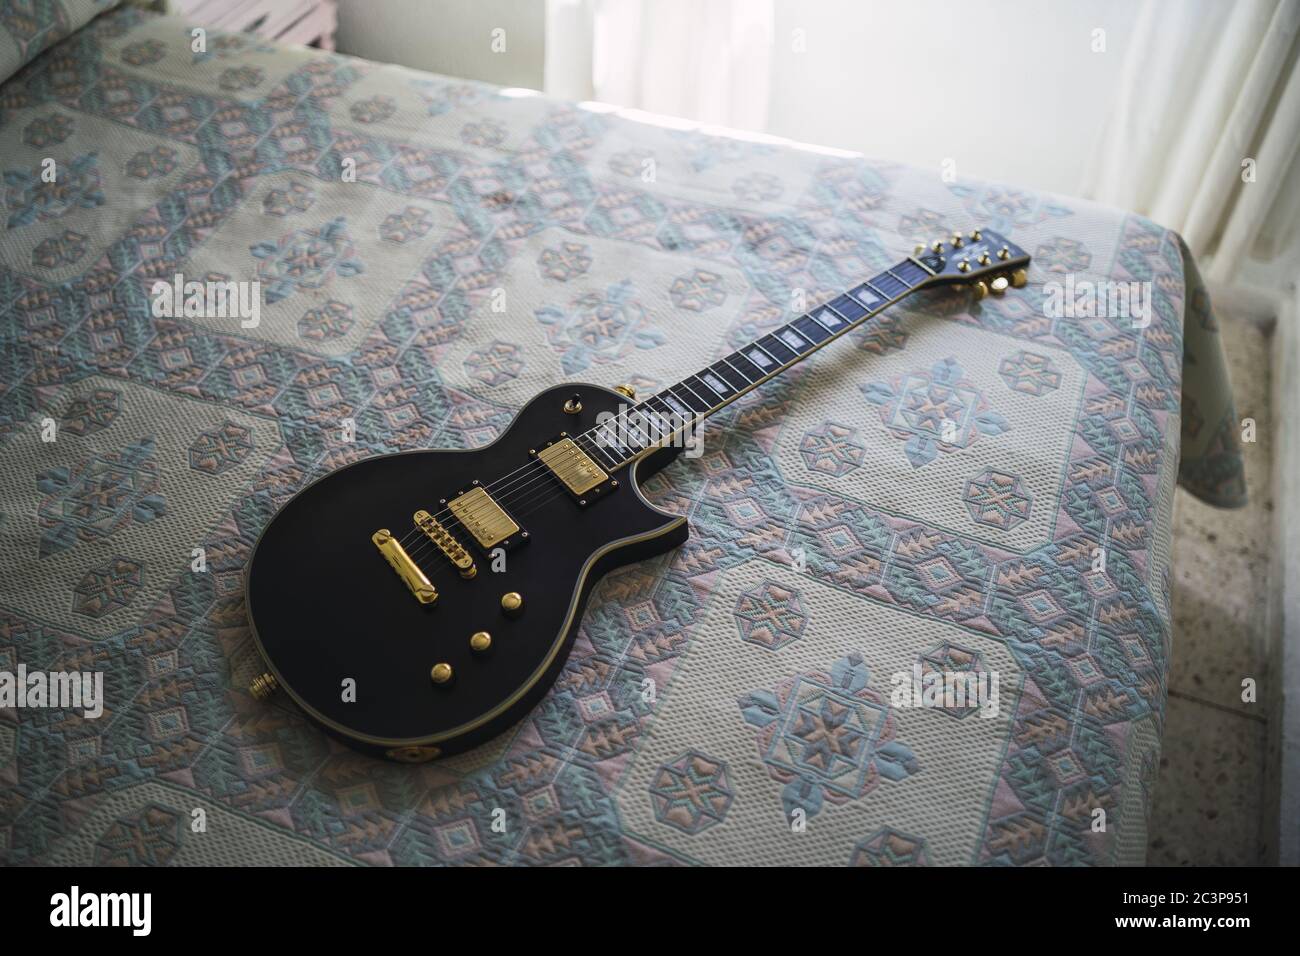 High angle shot of a black electric guitar on a bed with patterned sheet Stock Photo